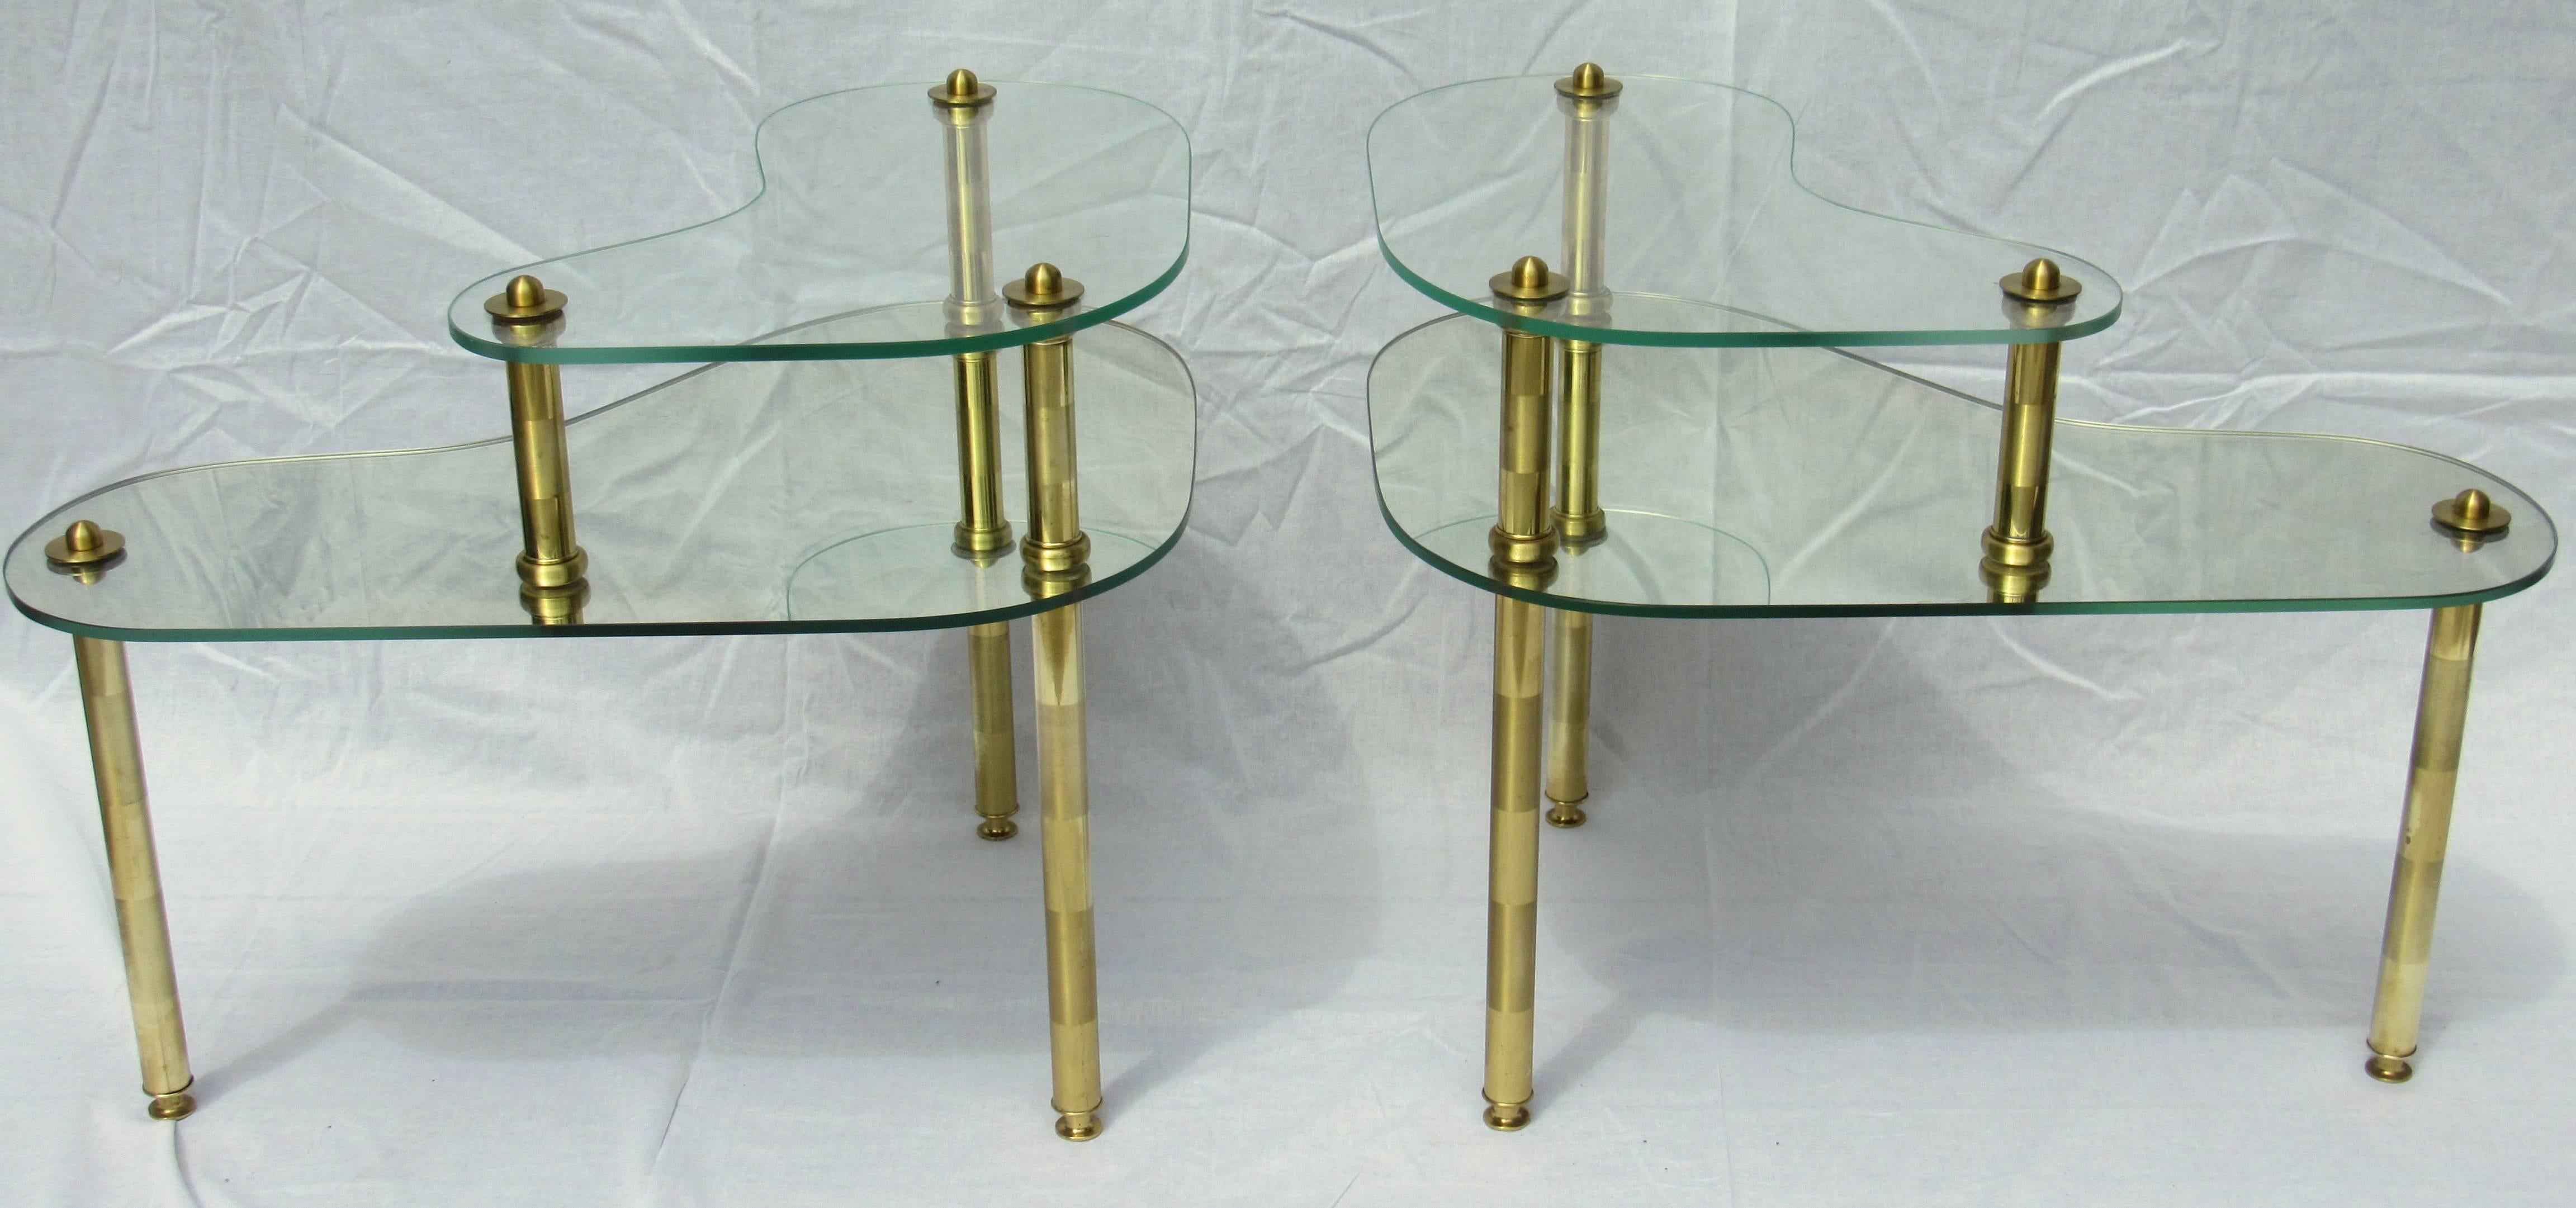 Mid-20th Century Semon Bache Pair of Chased Brass and Mirrored Glass End Tables from 1959 For Sale